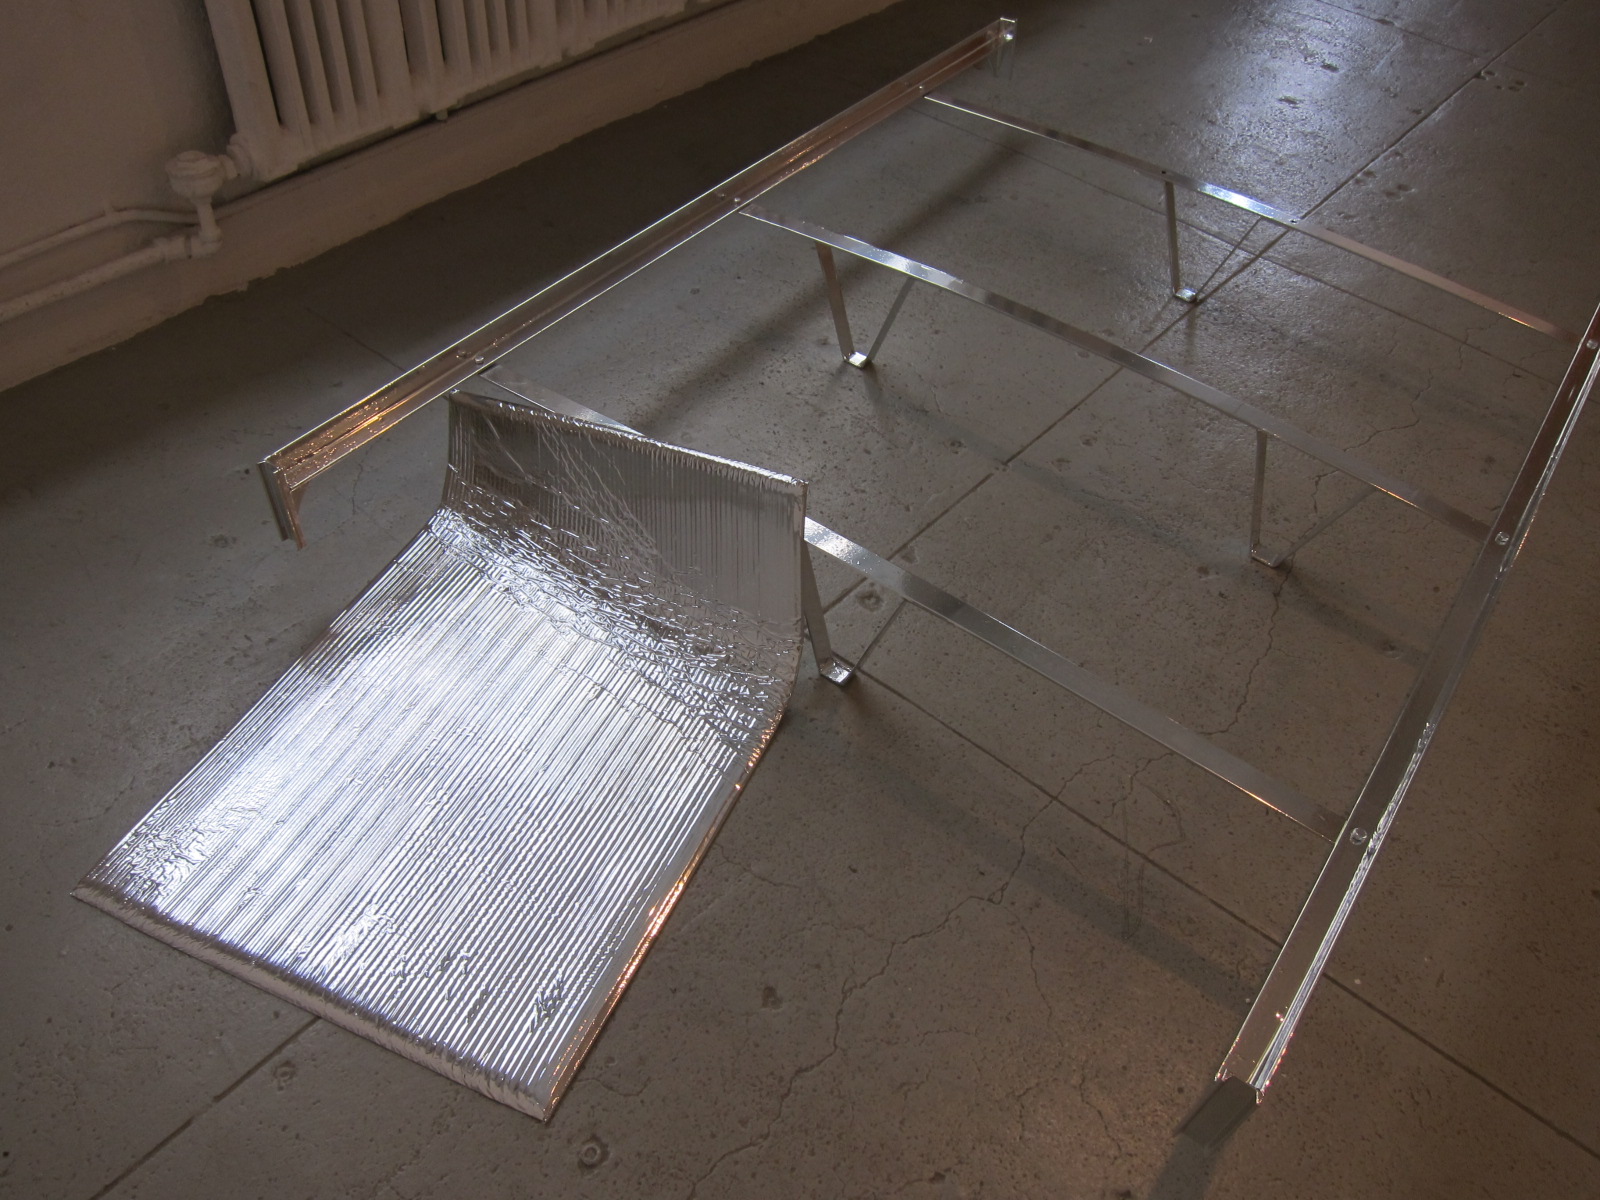   Ethan Breckenridge,   12 Pavilions , 2014. Multimedia objects wrapped in chrome vinyl. 